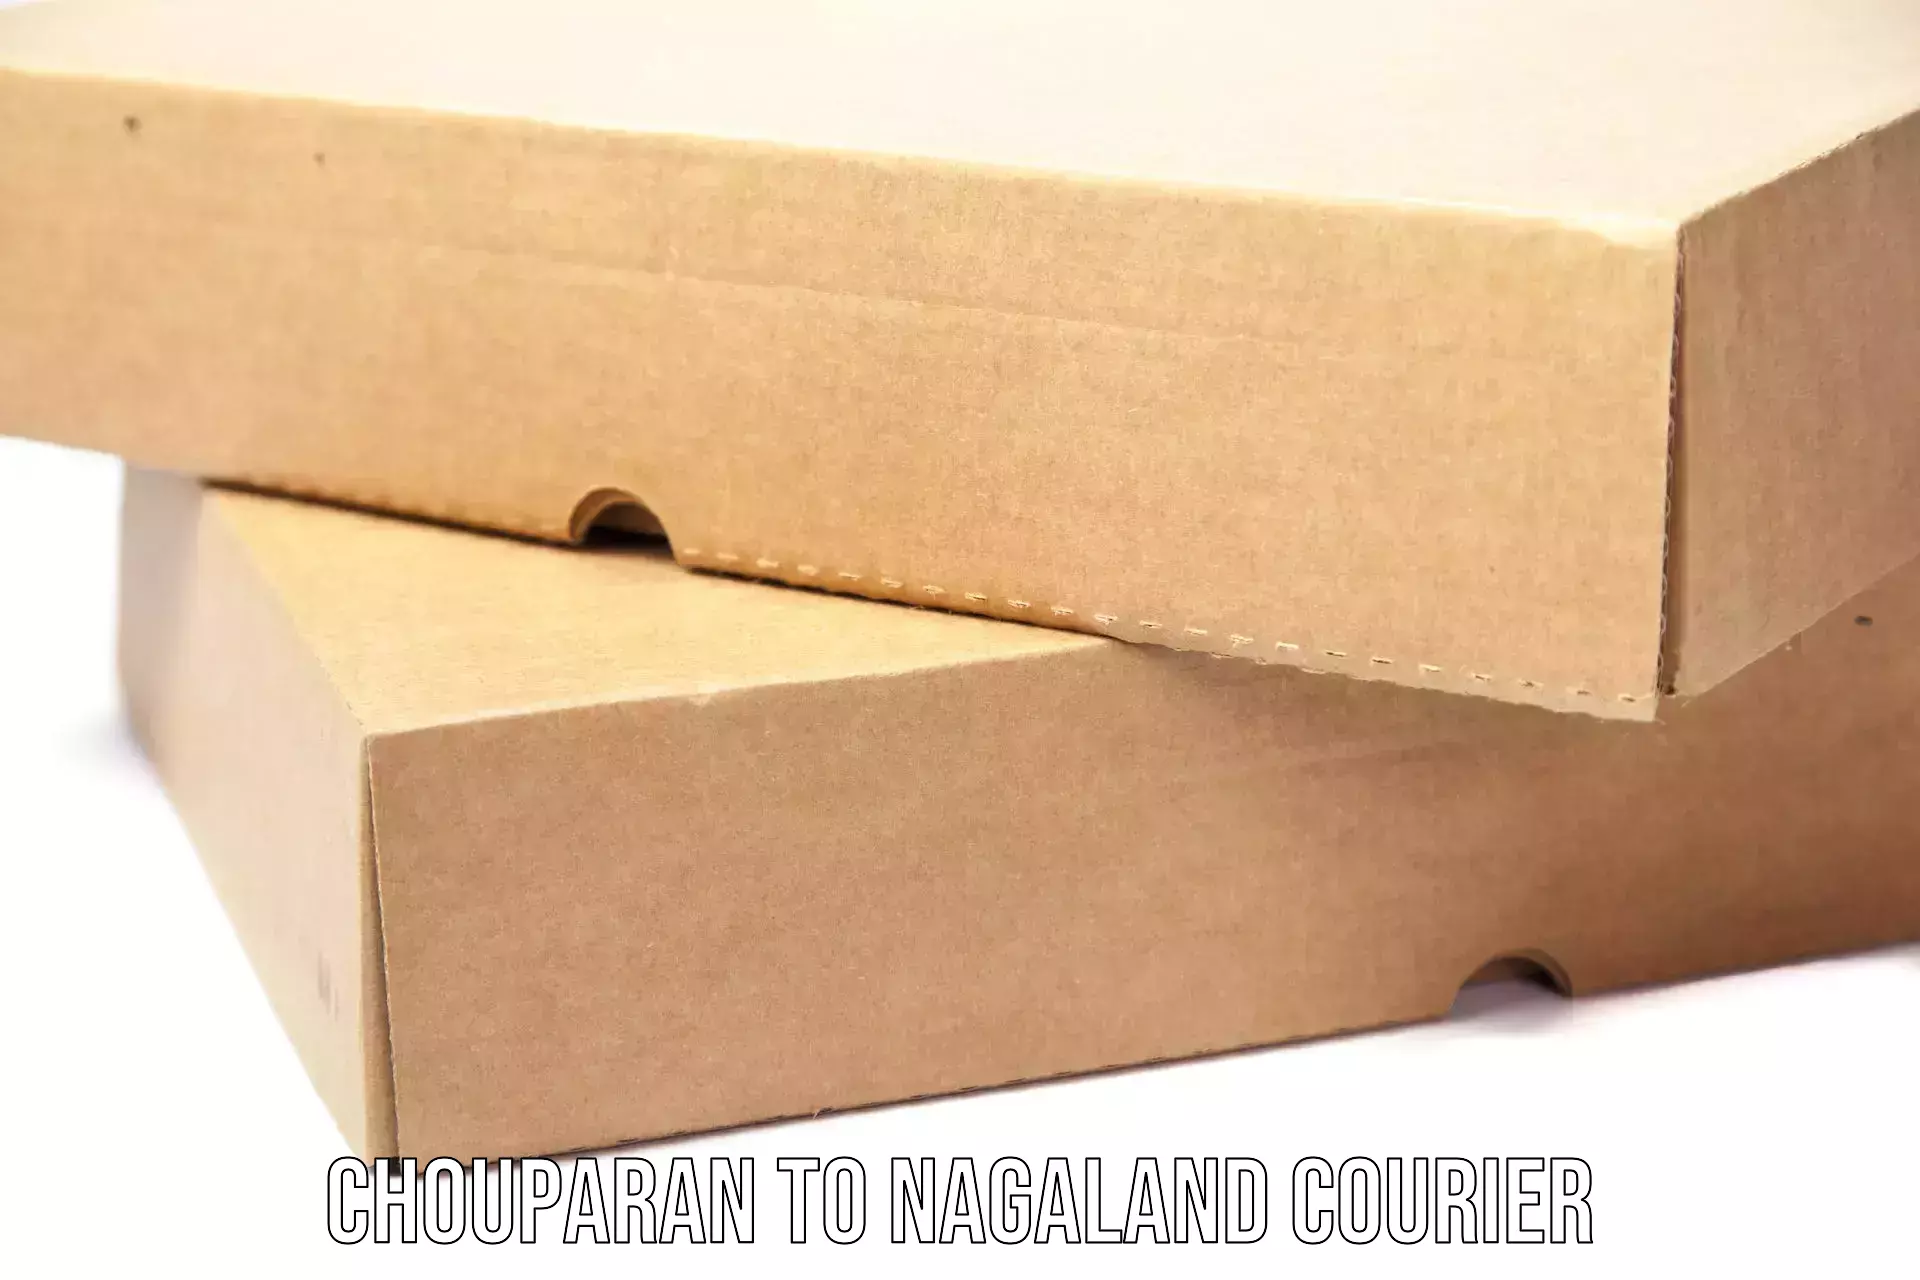 Custom courier packaging in Chouparan to Nagaland